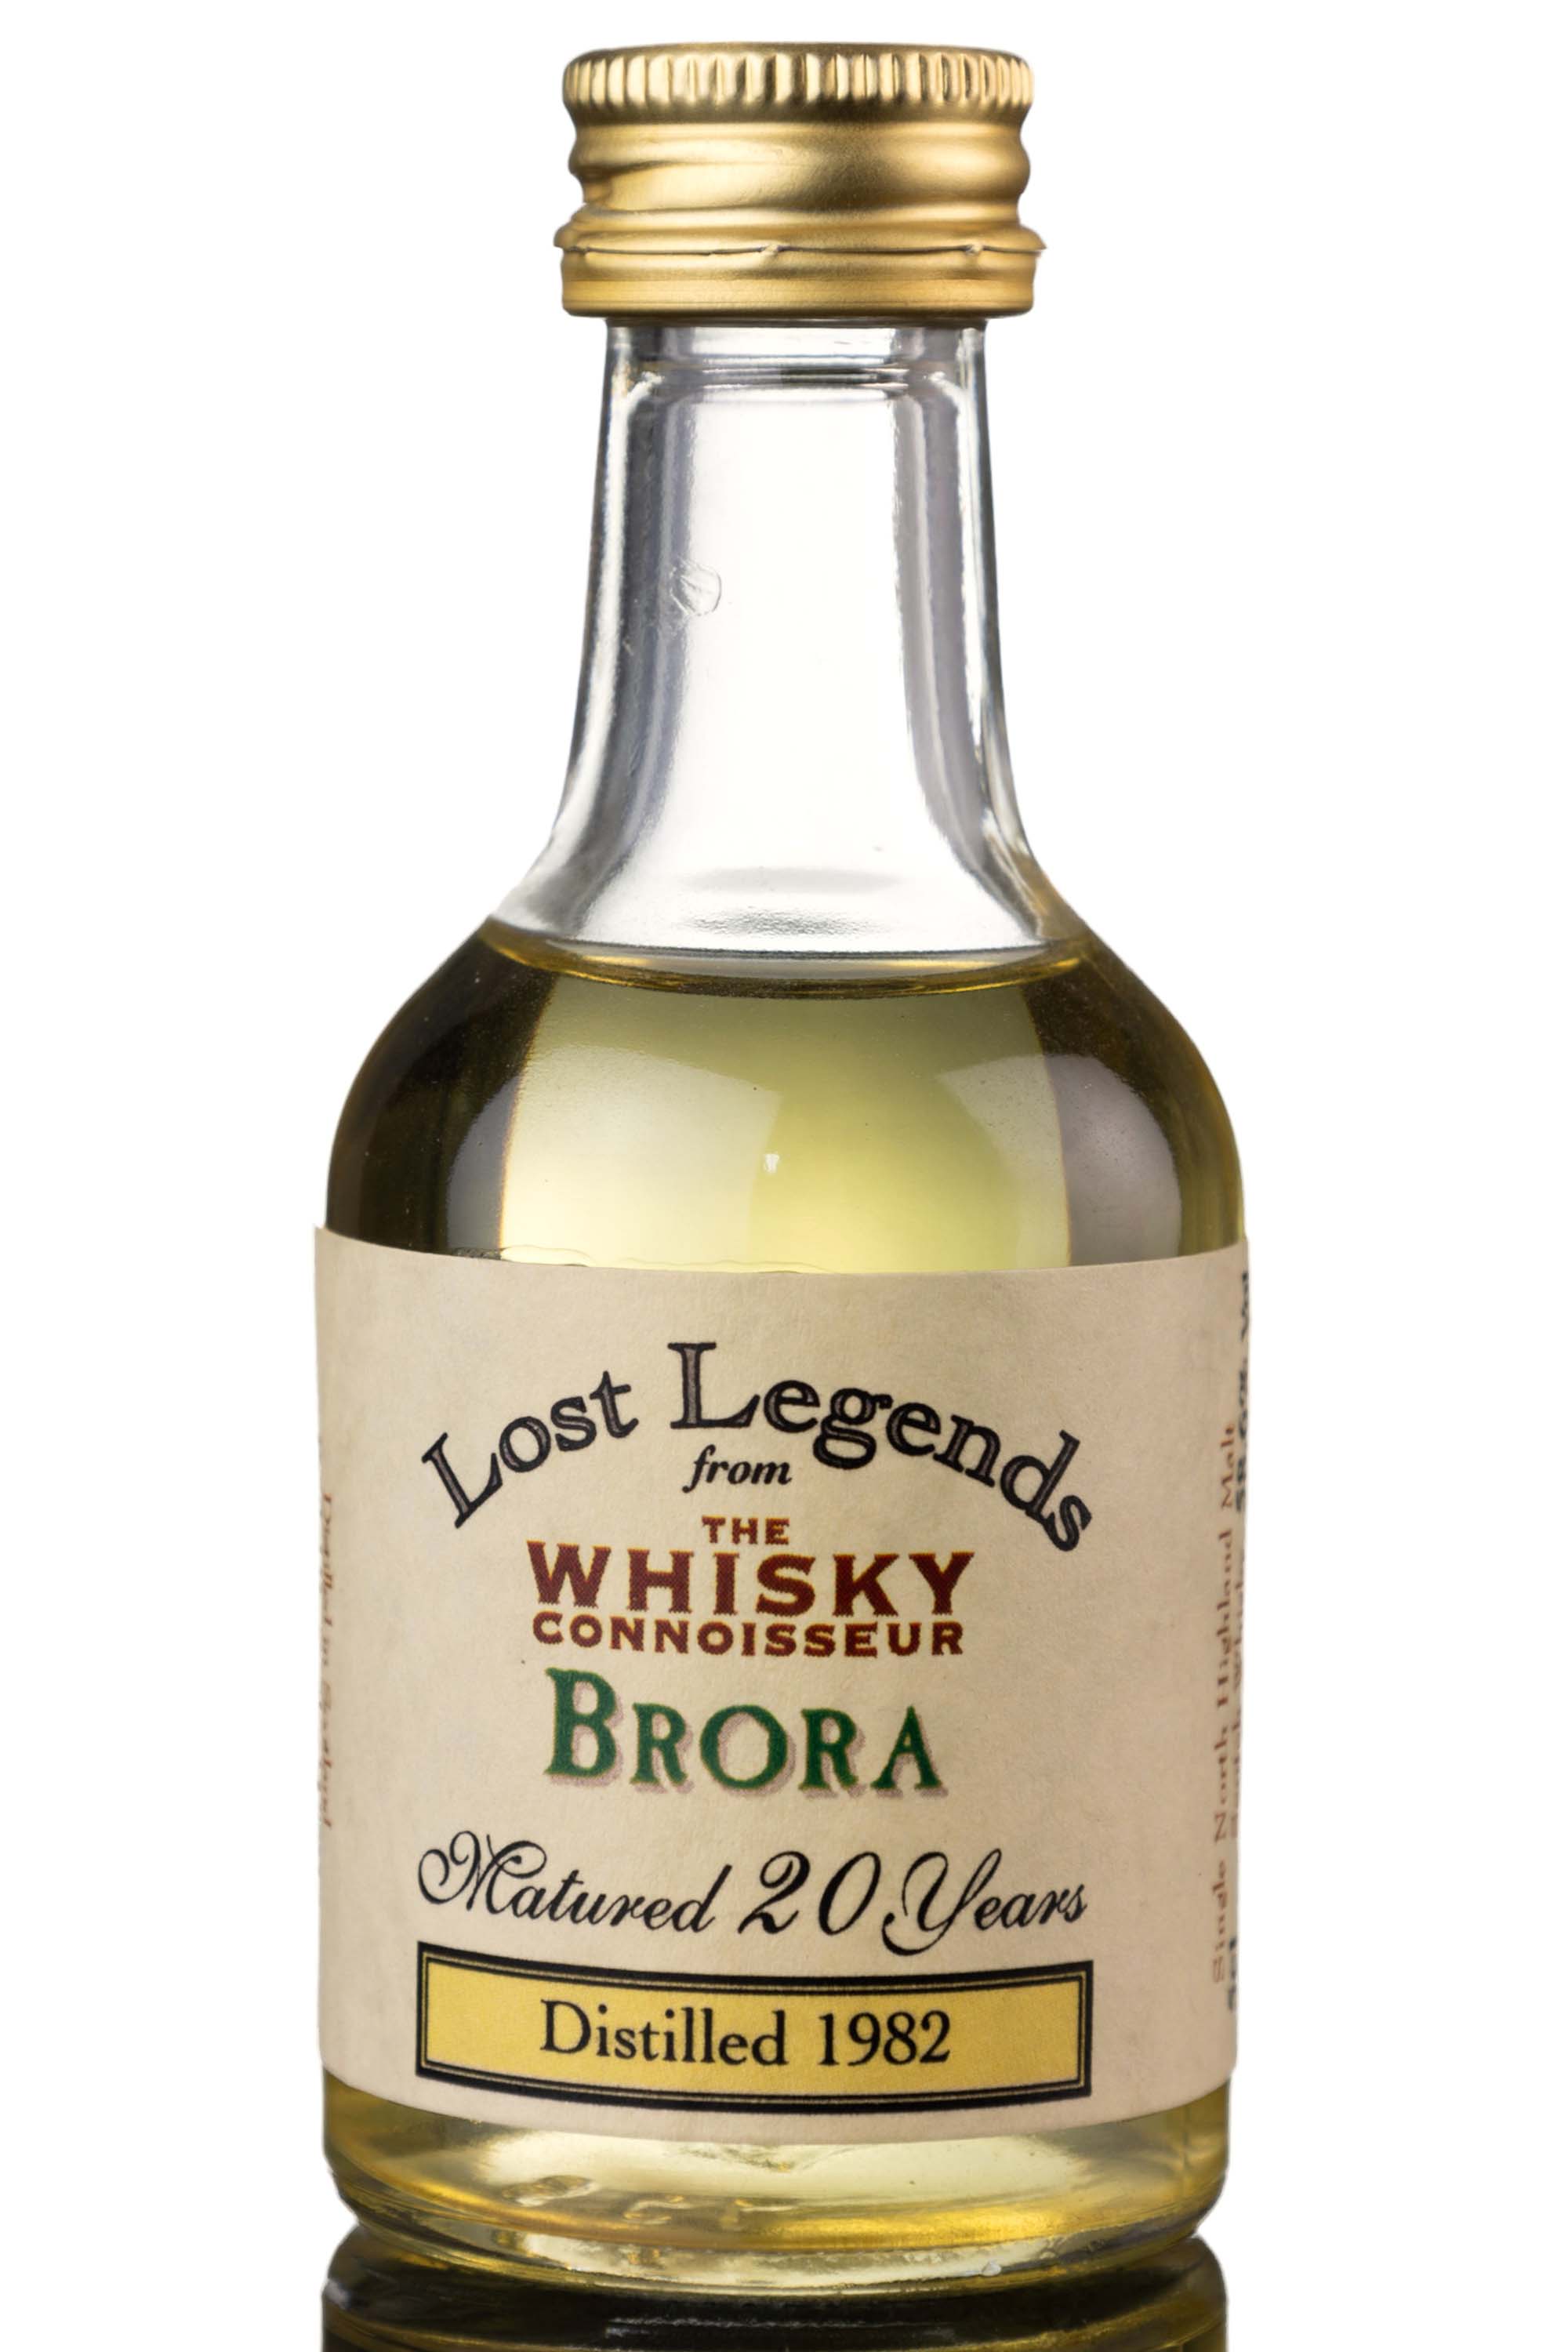 Brora 1982 - 20 Year Old - The Whisky Connoisseur - Lost Legends - Miniature